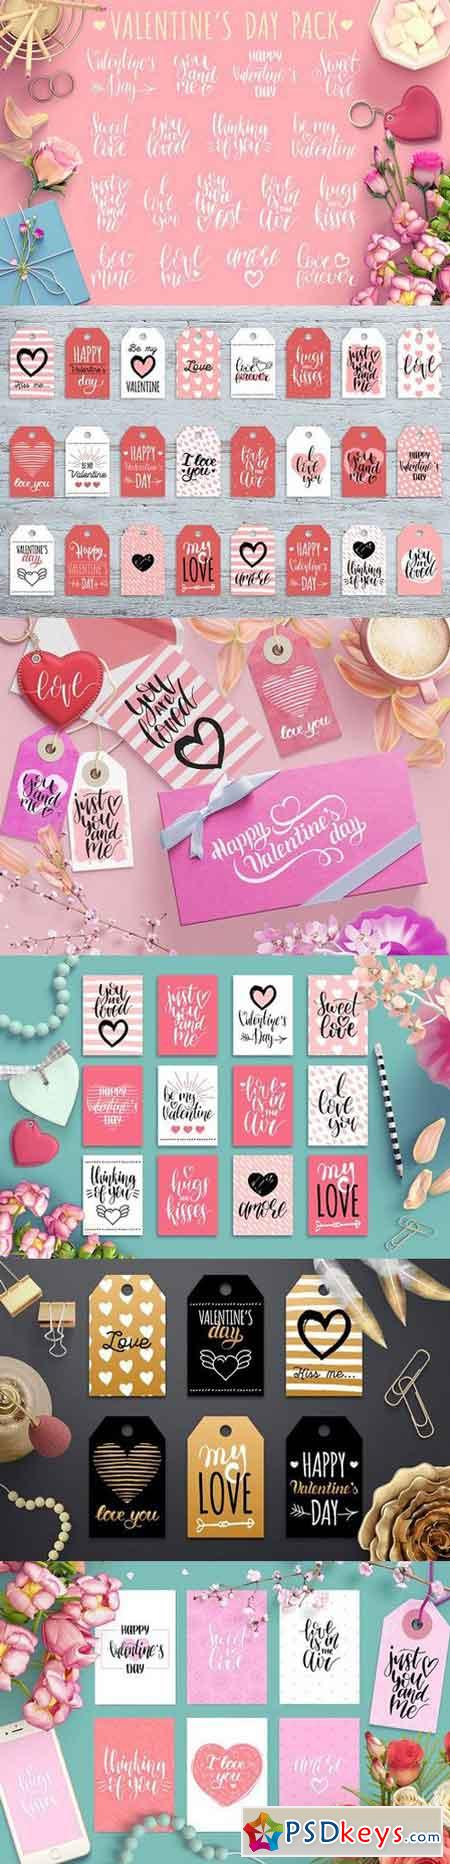 Valentine's day lettering and cards 1189564